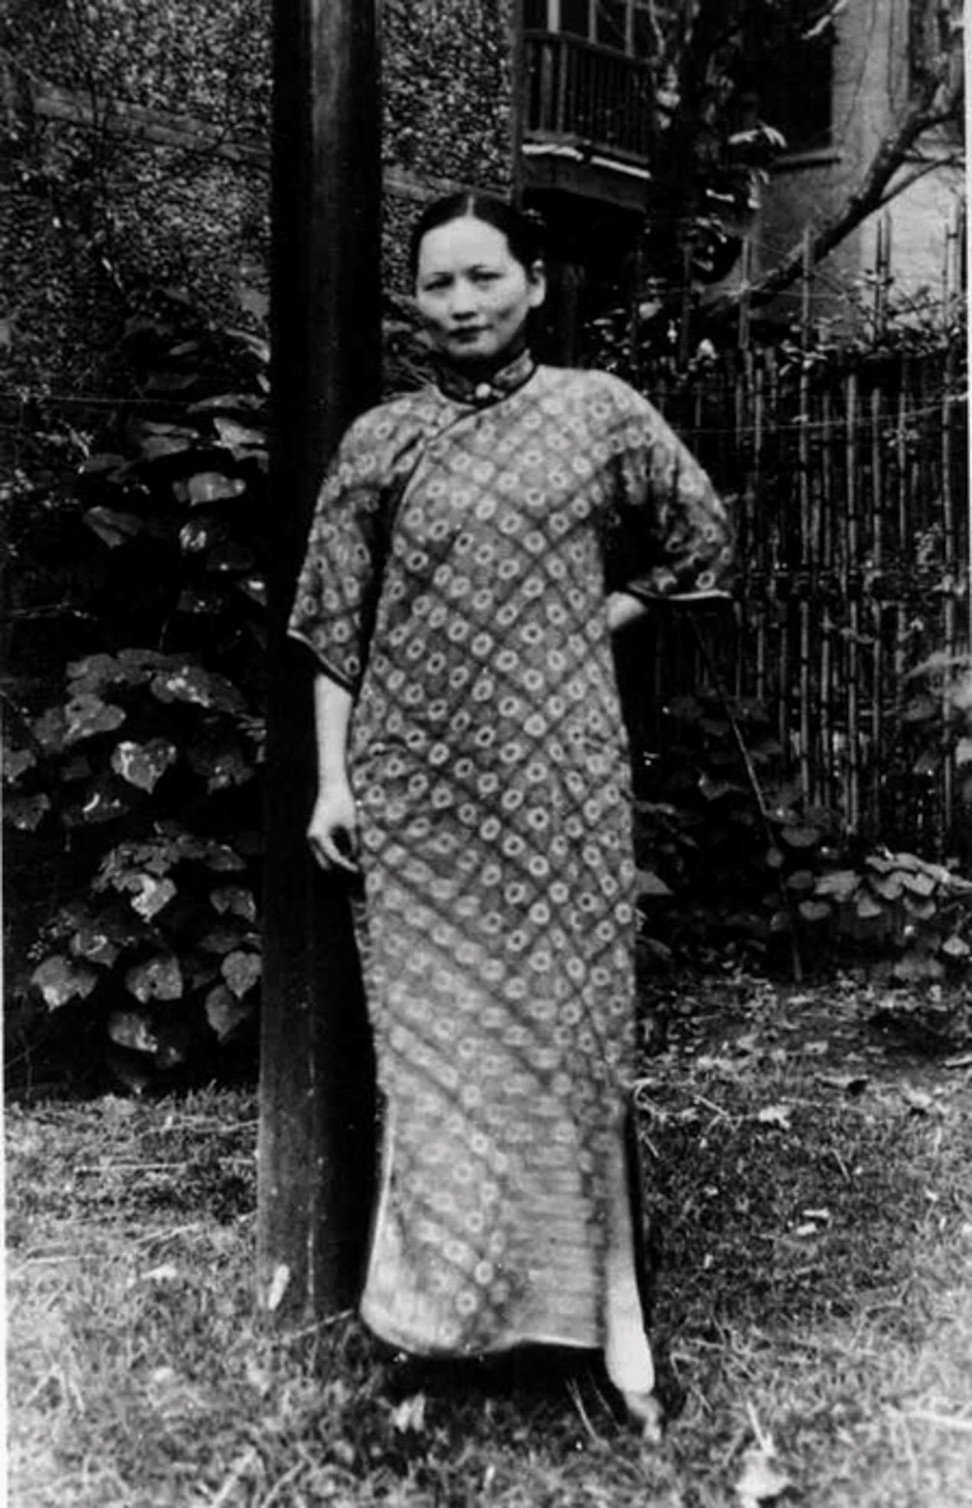 Soong Ching-ling, wife of Sun Yat-sen, the founding father of post-imperial China, wearing a cheongsam. Photo: Alamy